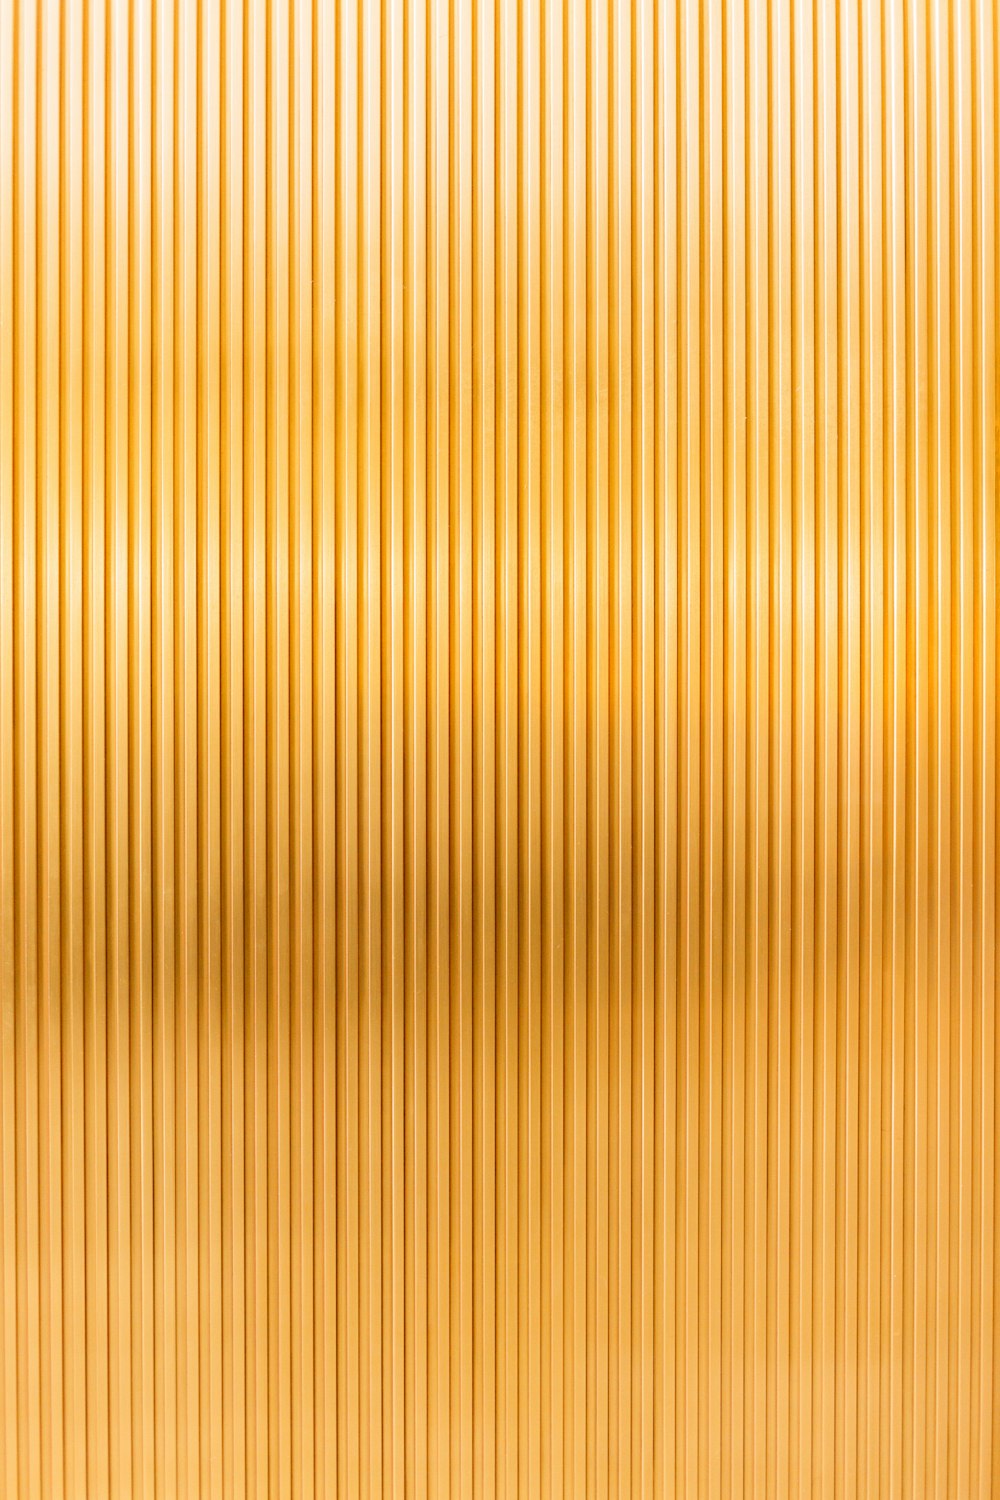 1500+ Gold Texture Pictures | Download Free Images on Unsplash